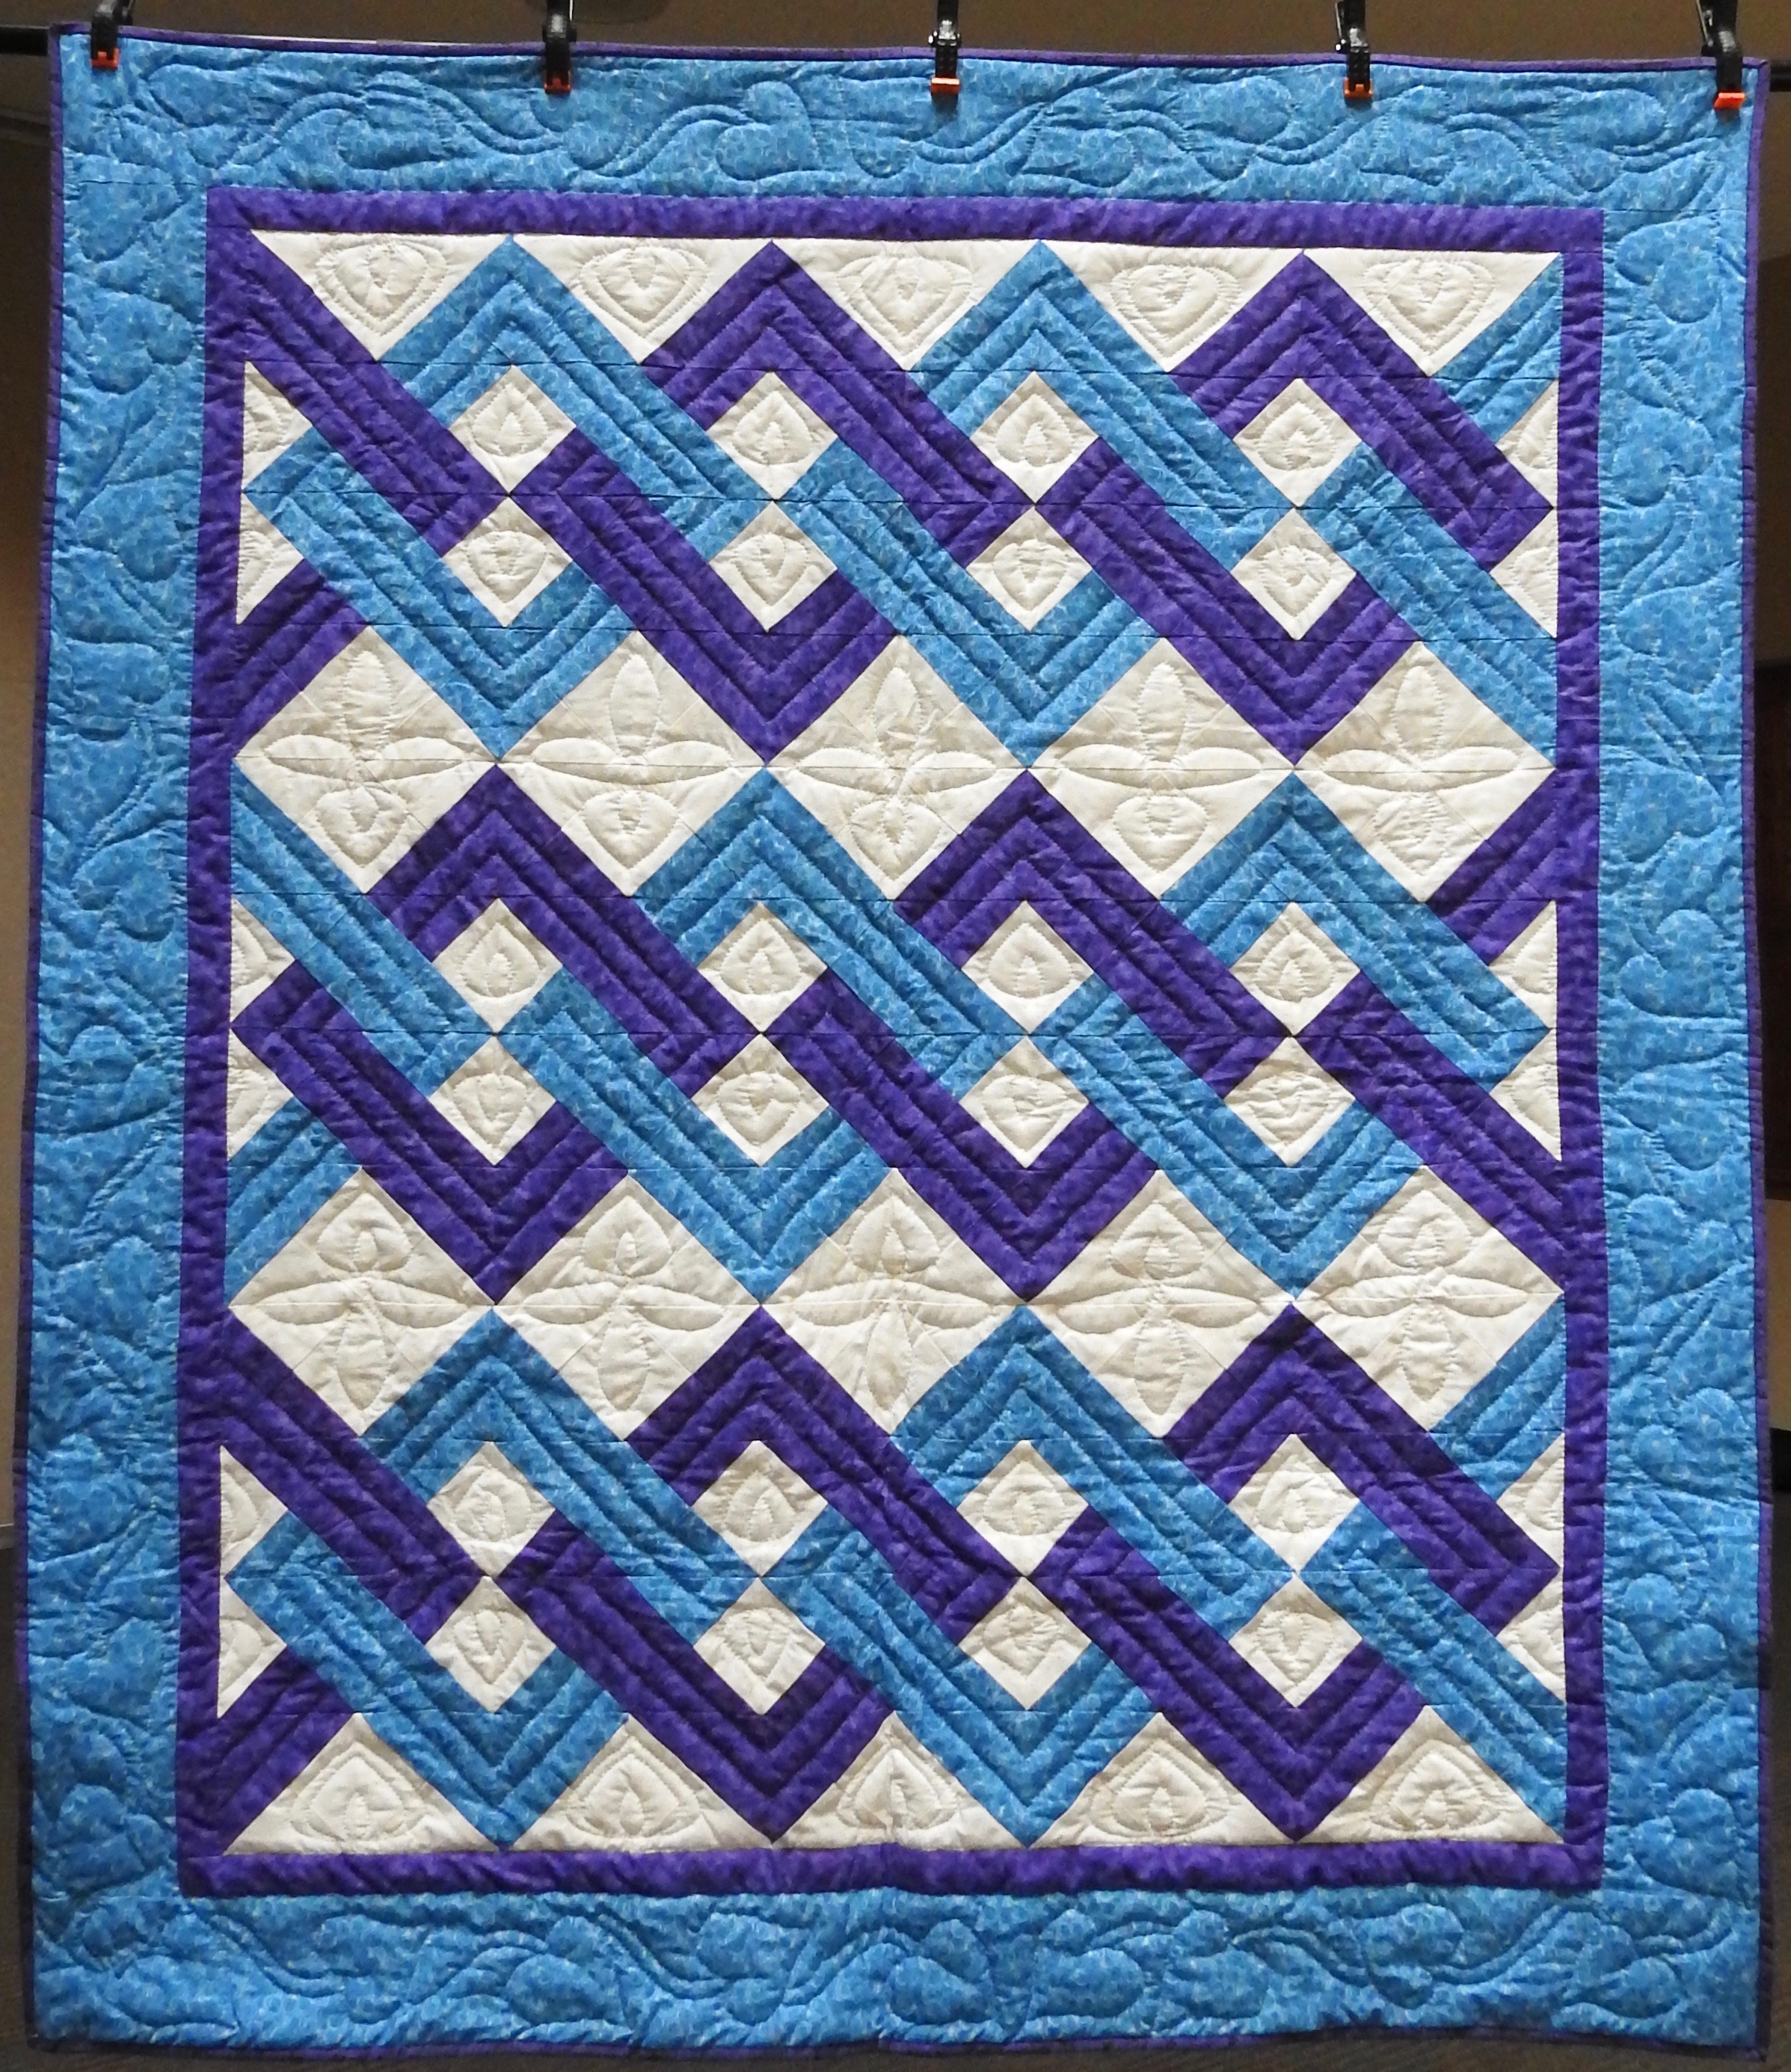  Interlocking Squares, Pieced, Hand Quilted by Evergreen Quilters, Anonymously donated, 58 x 64”